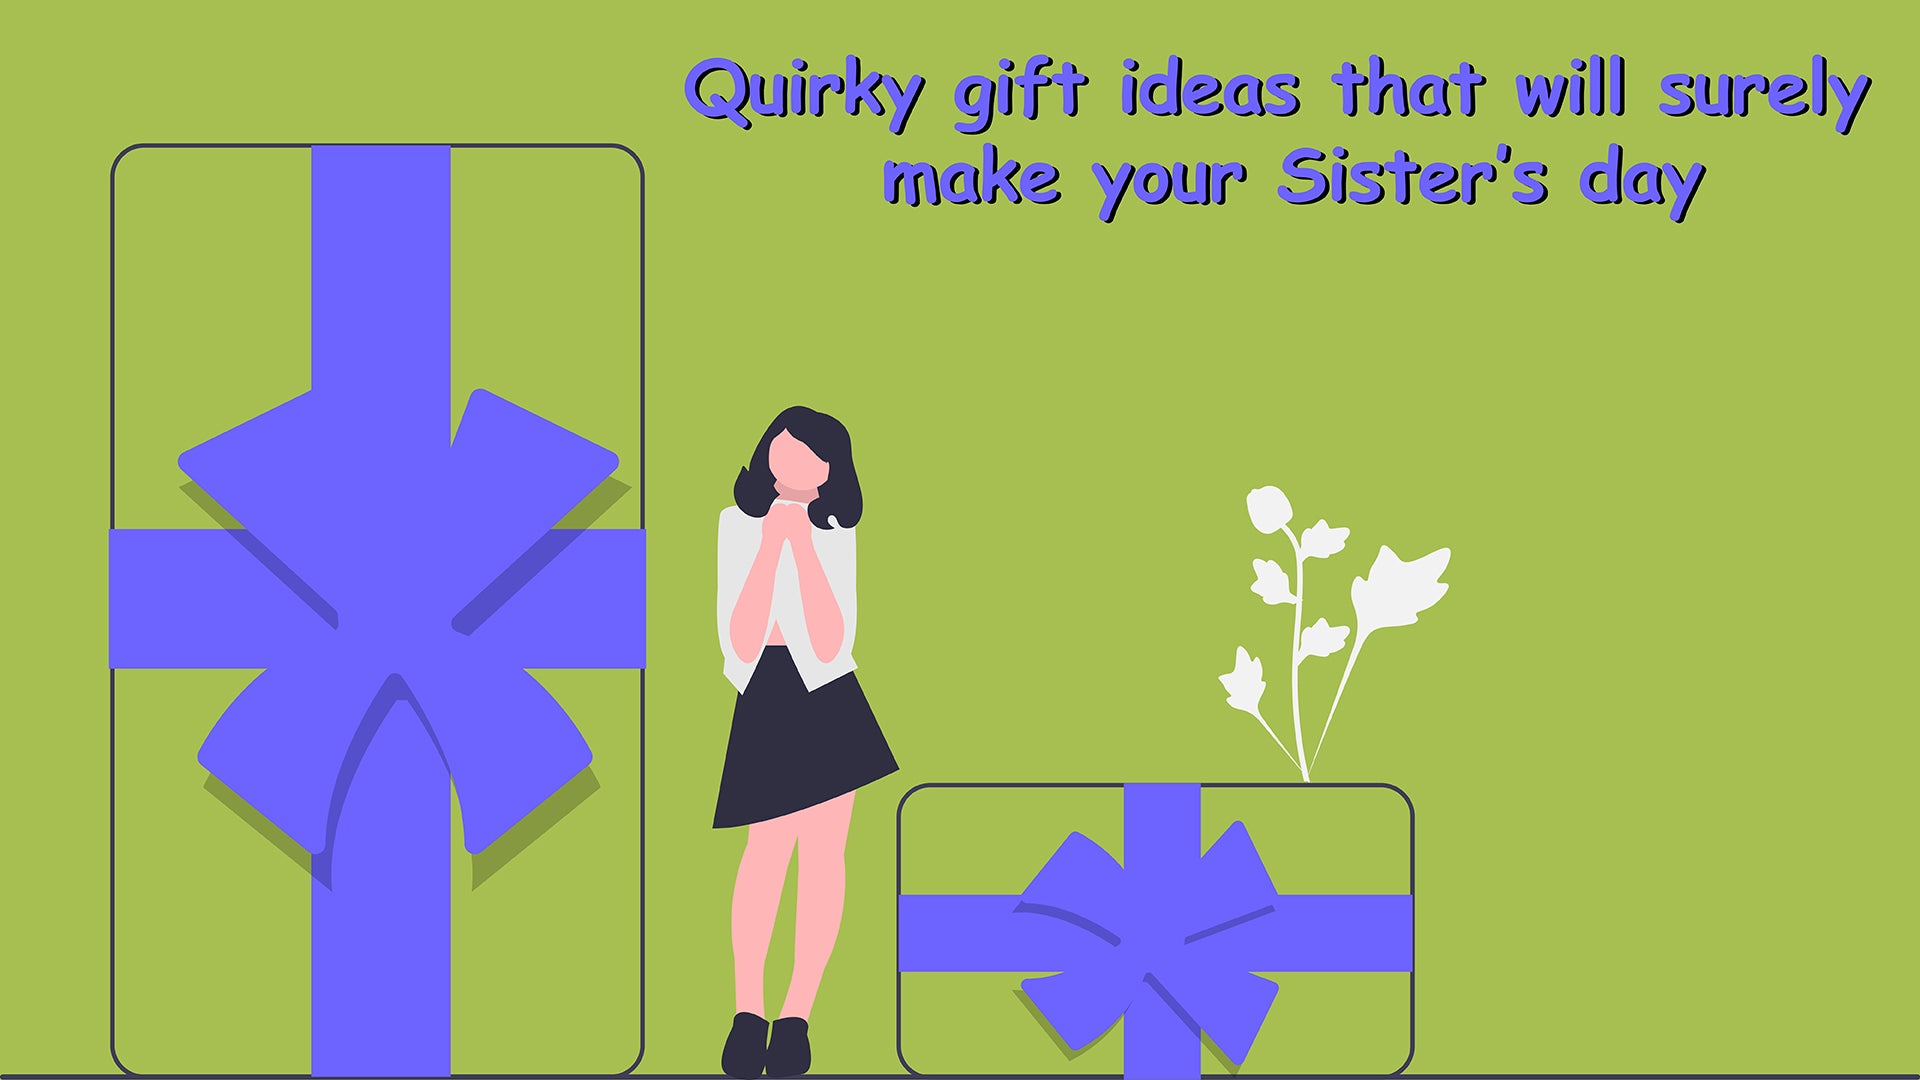 What gift should I buy my 7-year-old sister for her birthday? - Quora